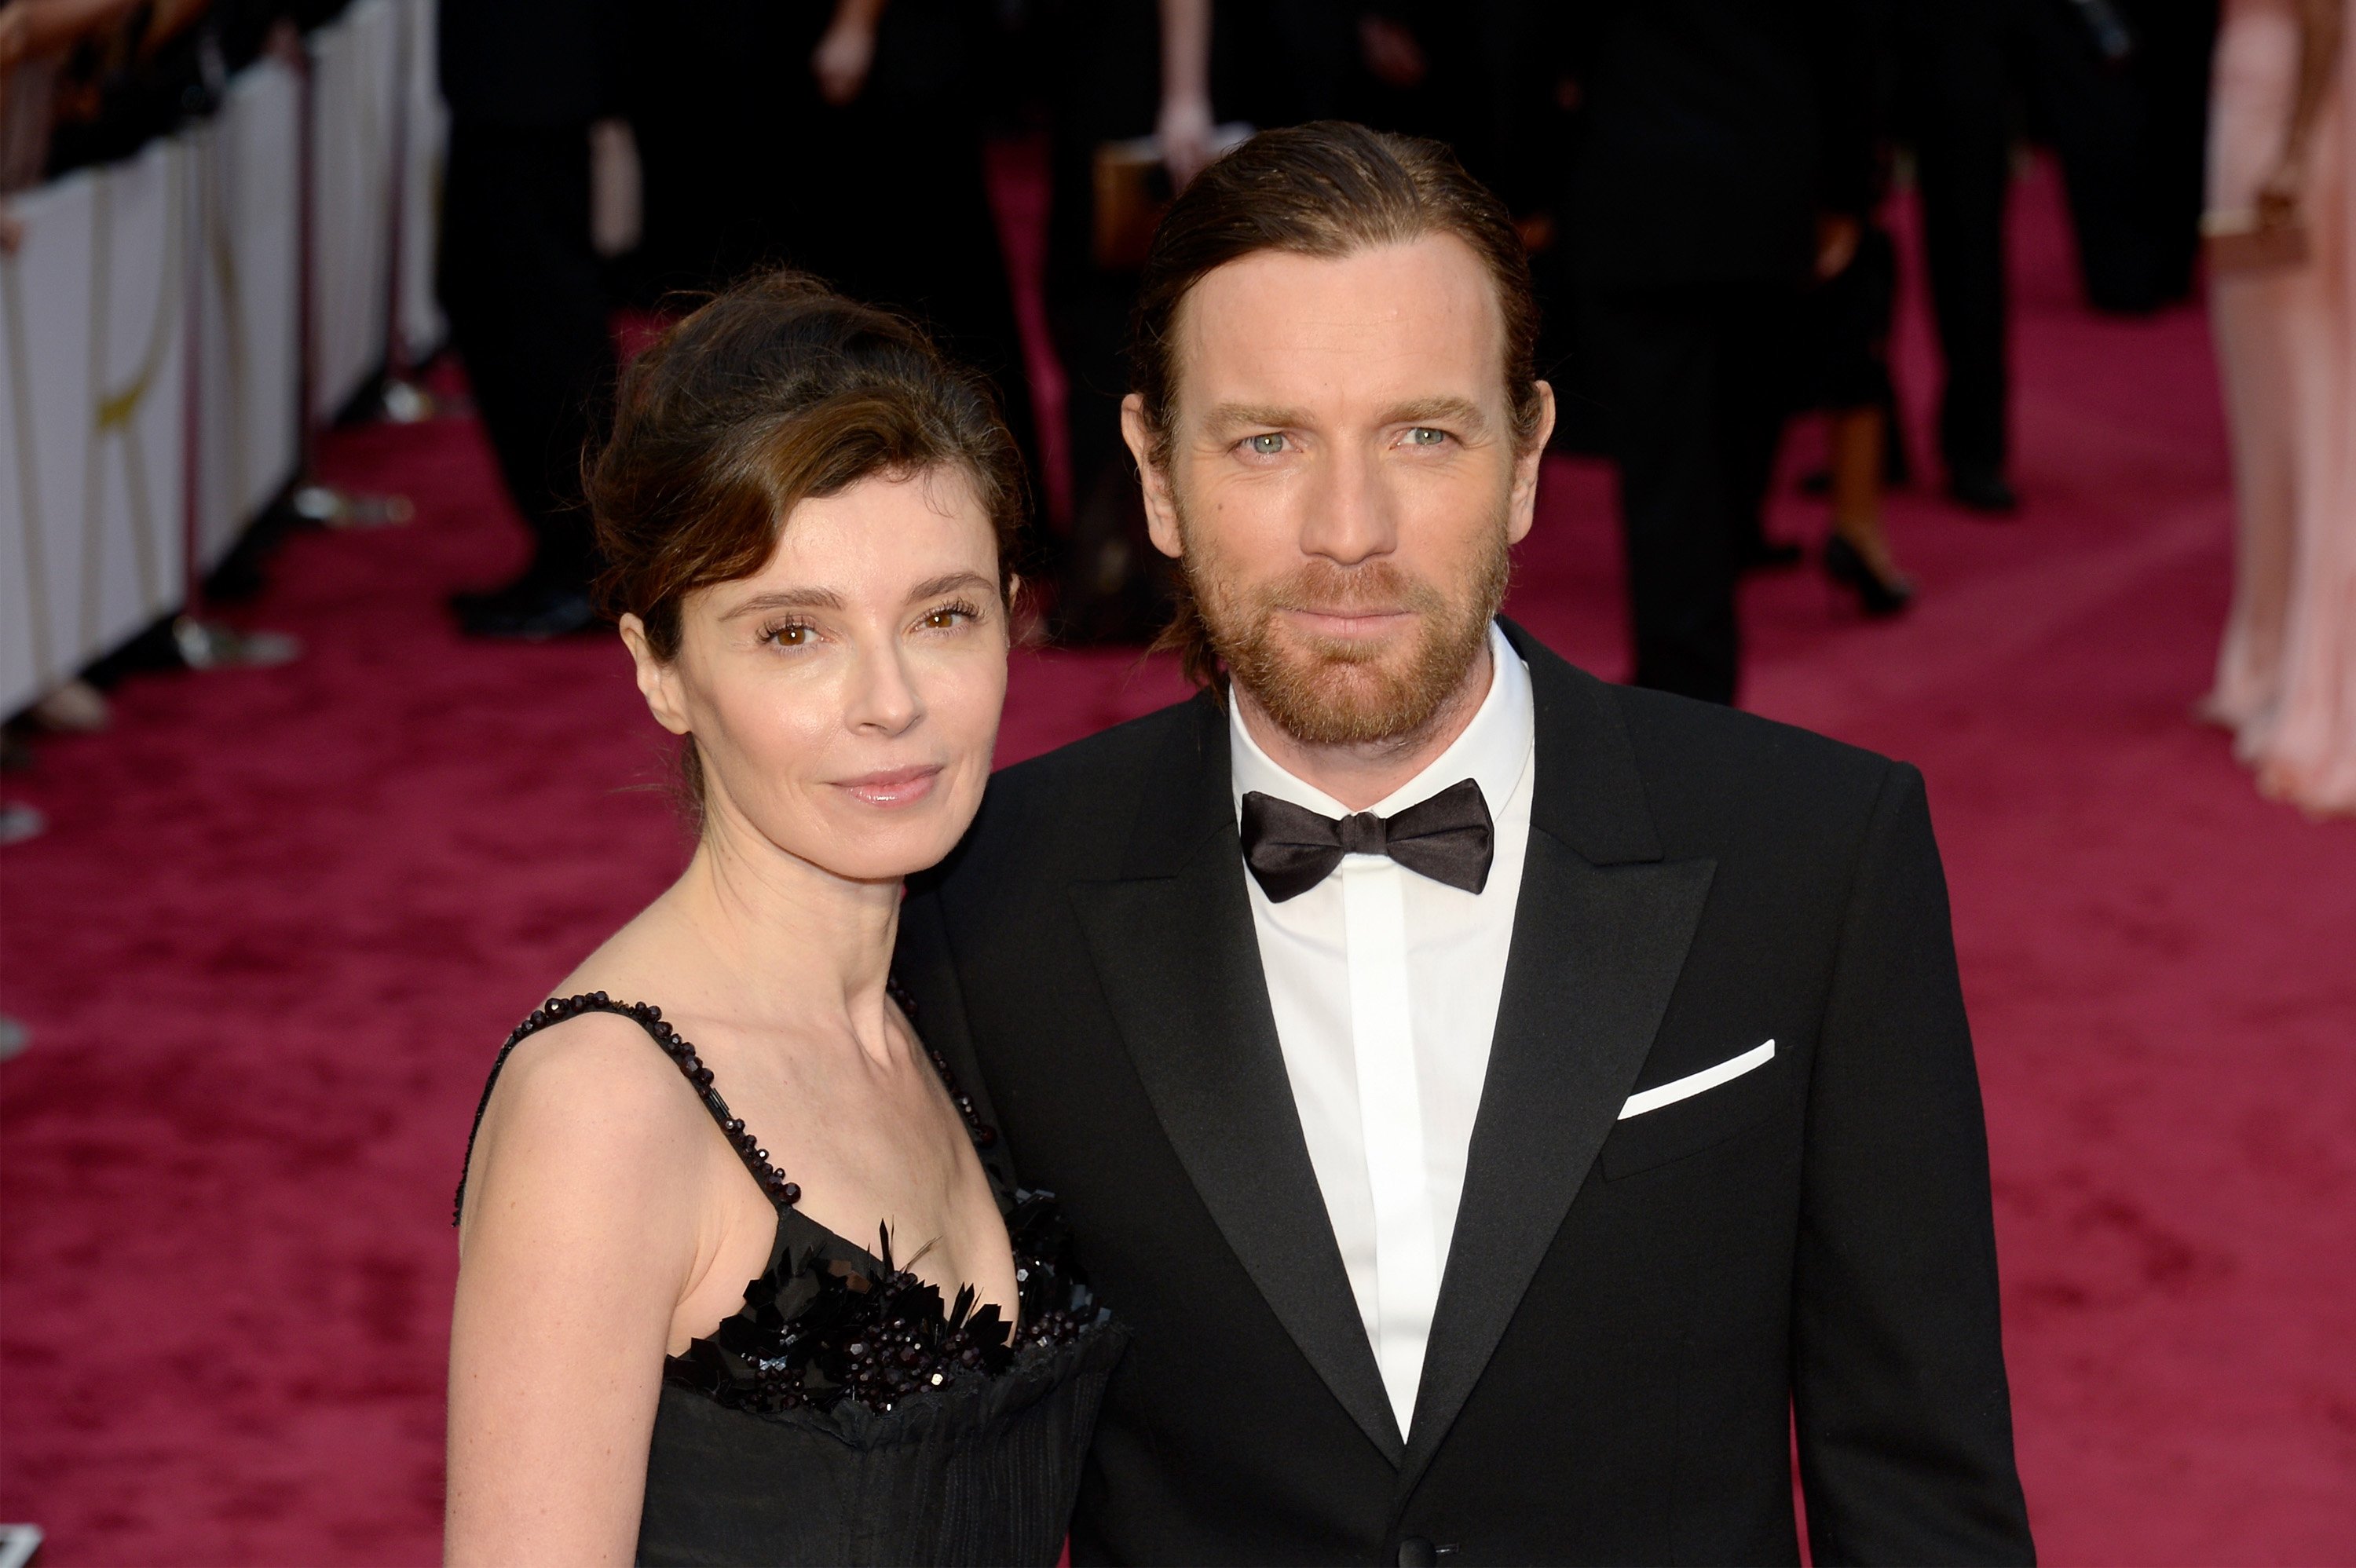 Eve Mavrakis and Ewan McGregor attend the Oscars held at Hollywood & Highland Center on March 2, 2014 in Hollywood, California. 